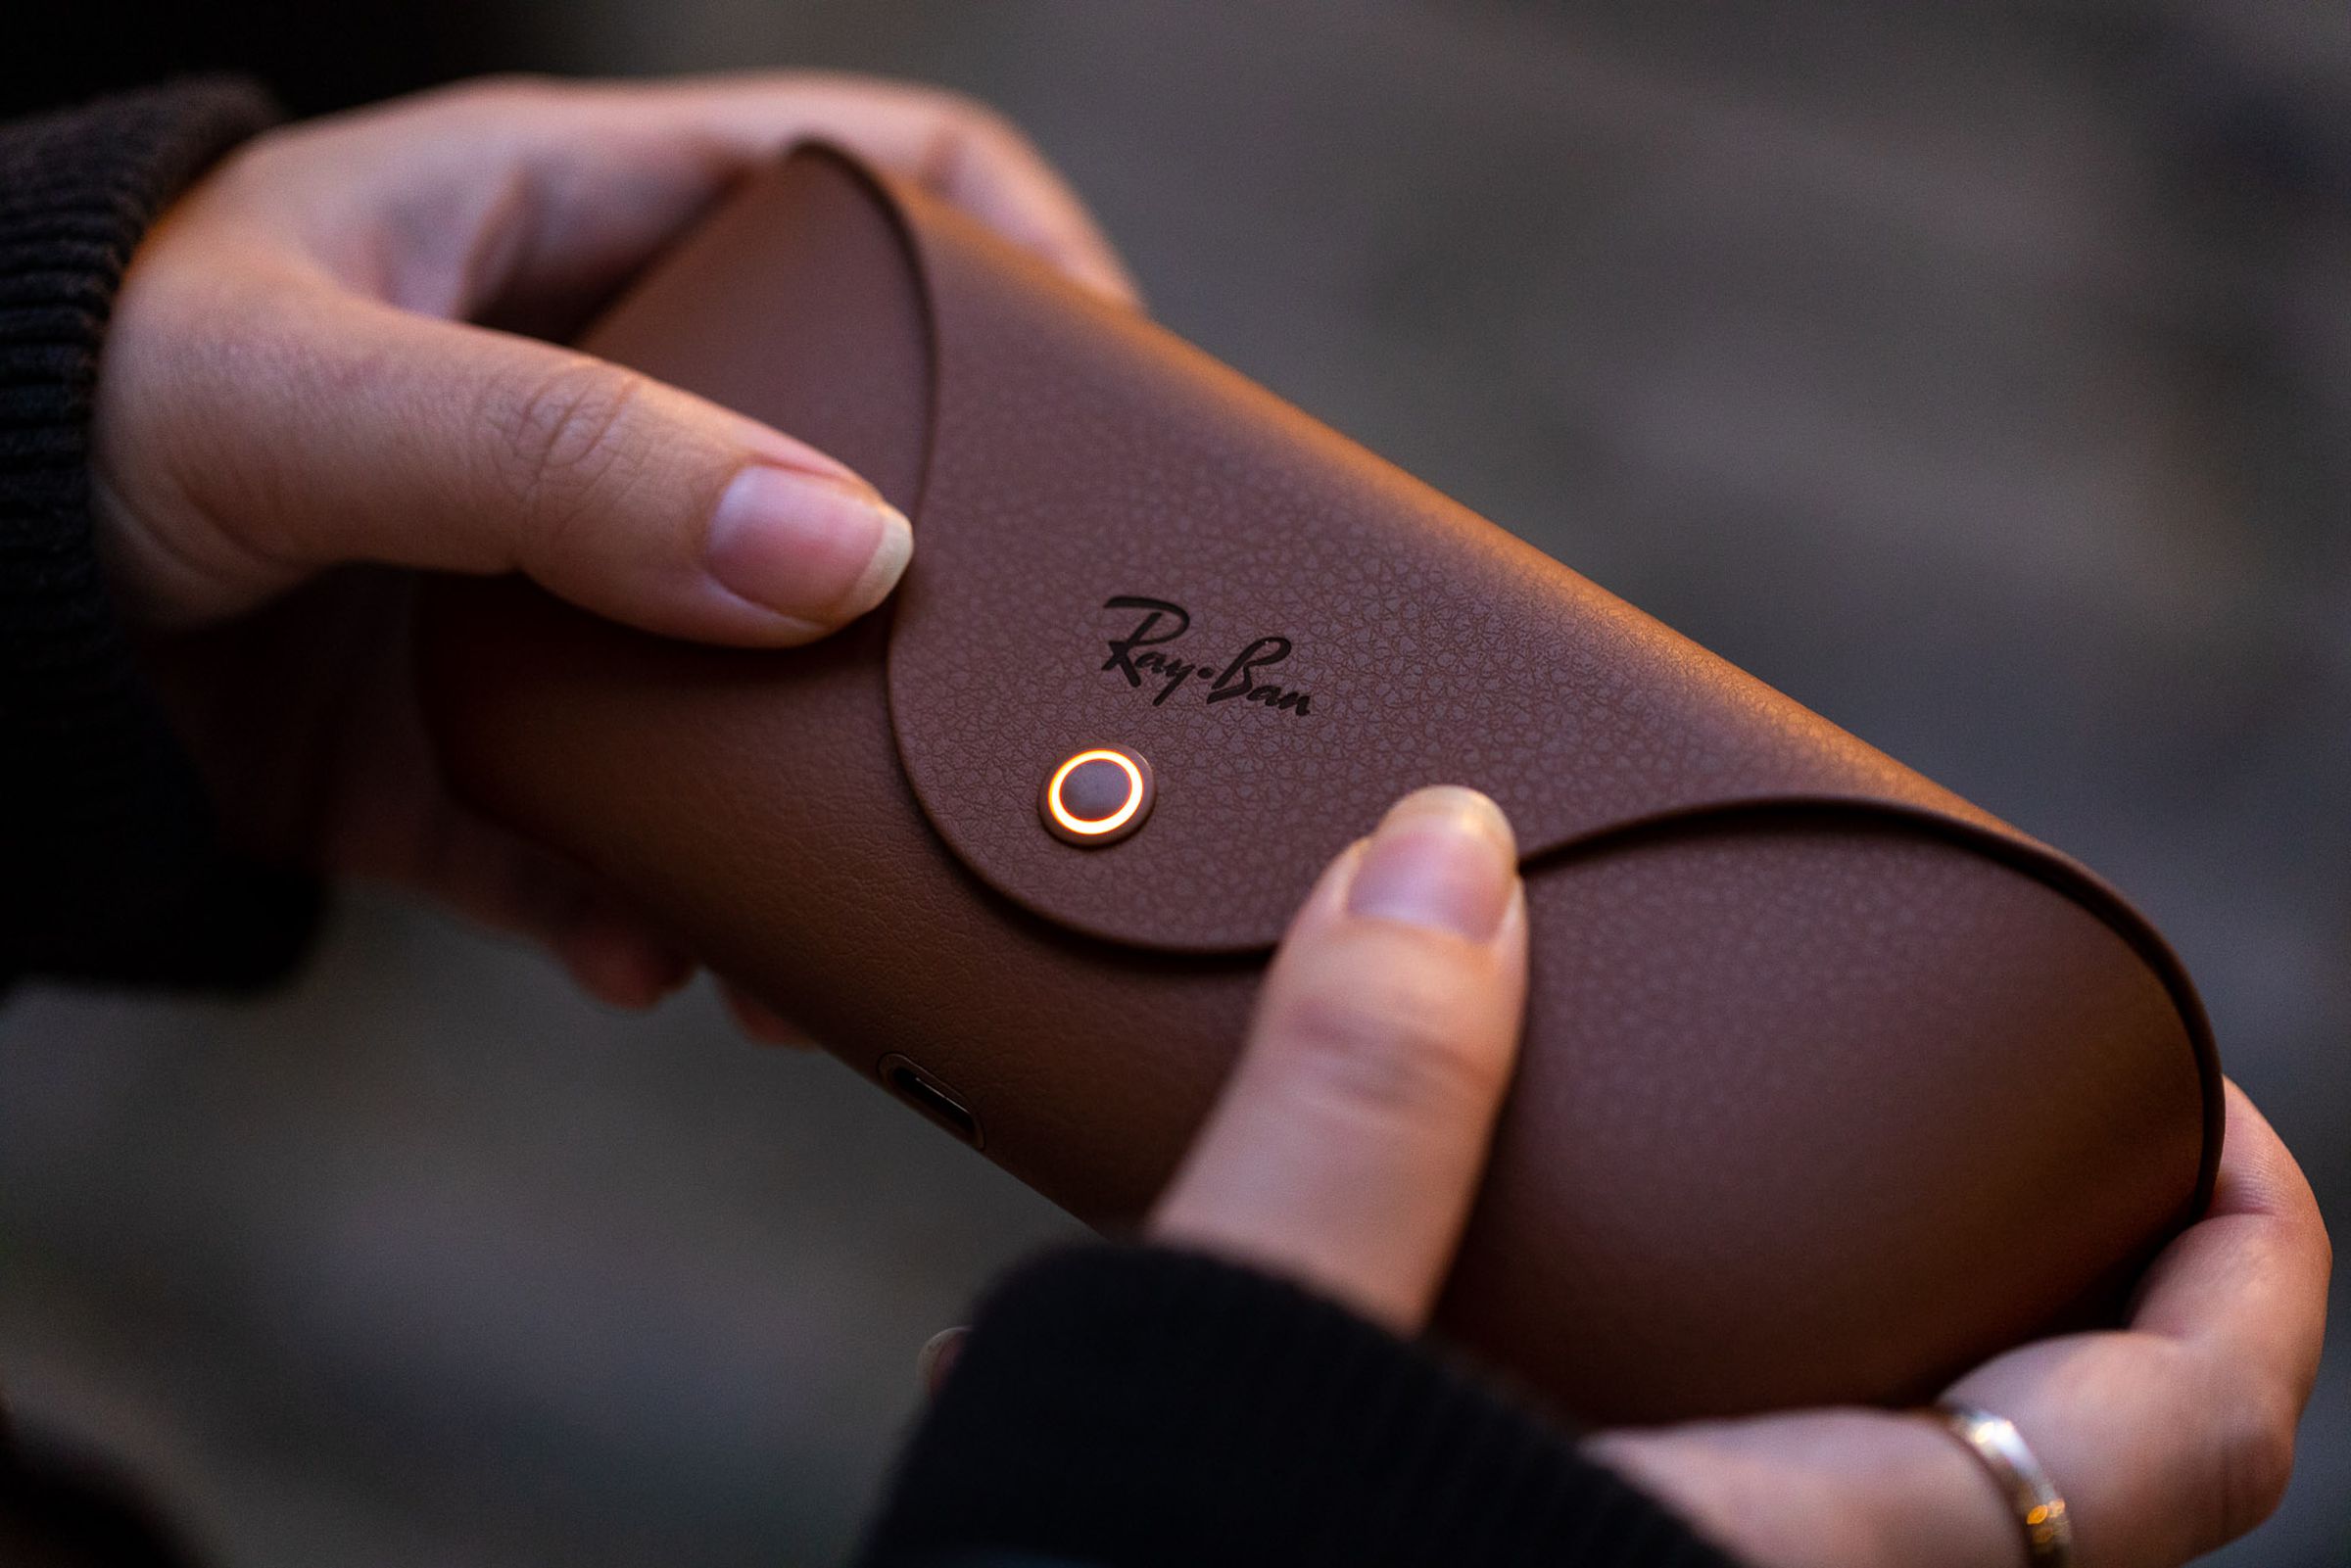 Person holding closed Ray-Ban Meta Smart Glasses charging case.